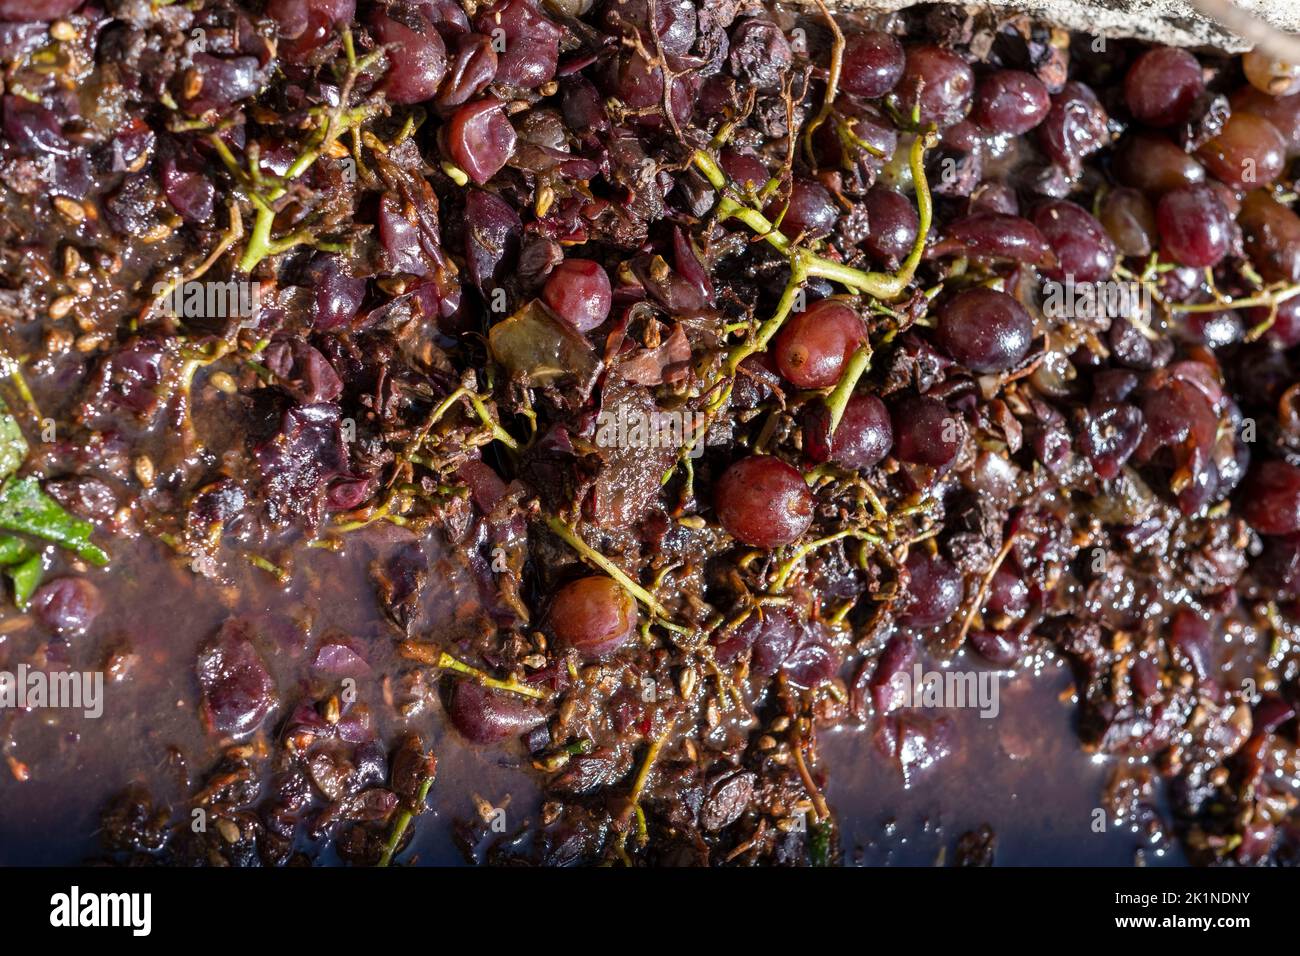 Close up of grapes that have been crushed by foot in a stone chamber at the Statos-Agios Fotios Rural Festival, paphos region, Cyprus. Stock Photo